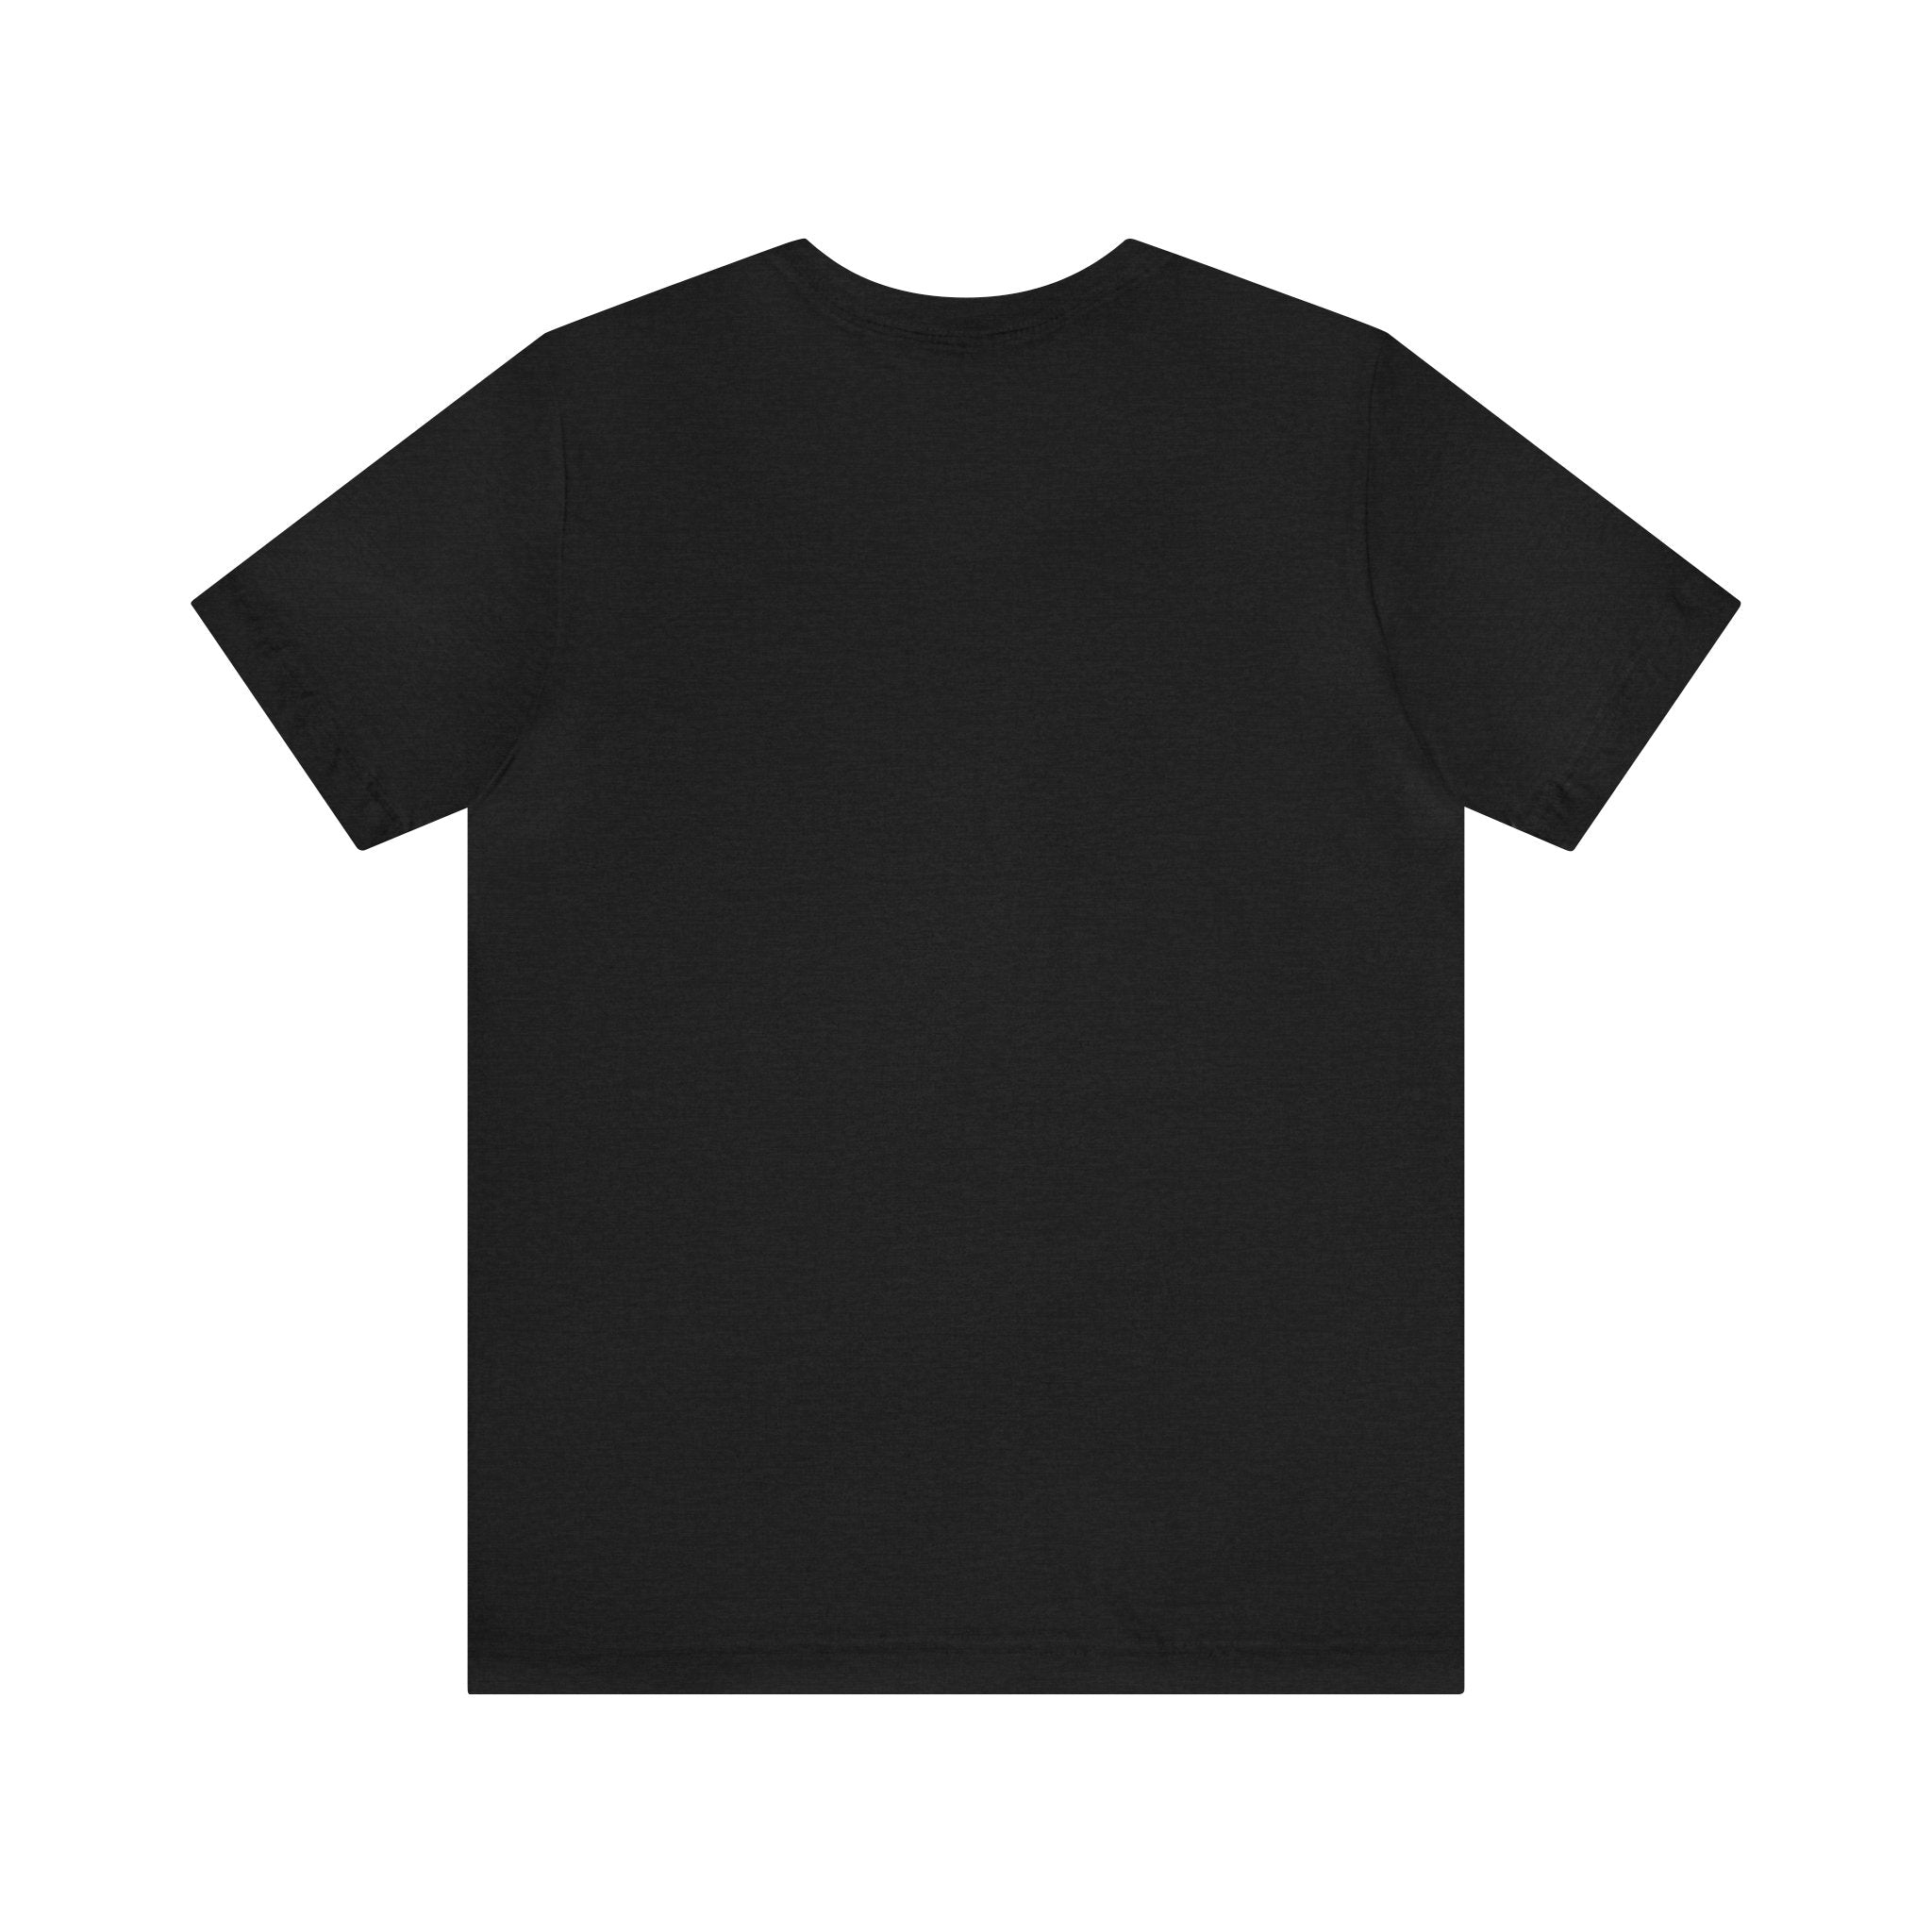 A Bigger Than Yours t-shirt, the ultimate statement piece, against a white background.